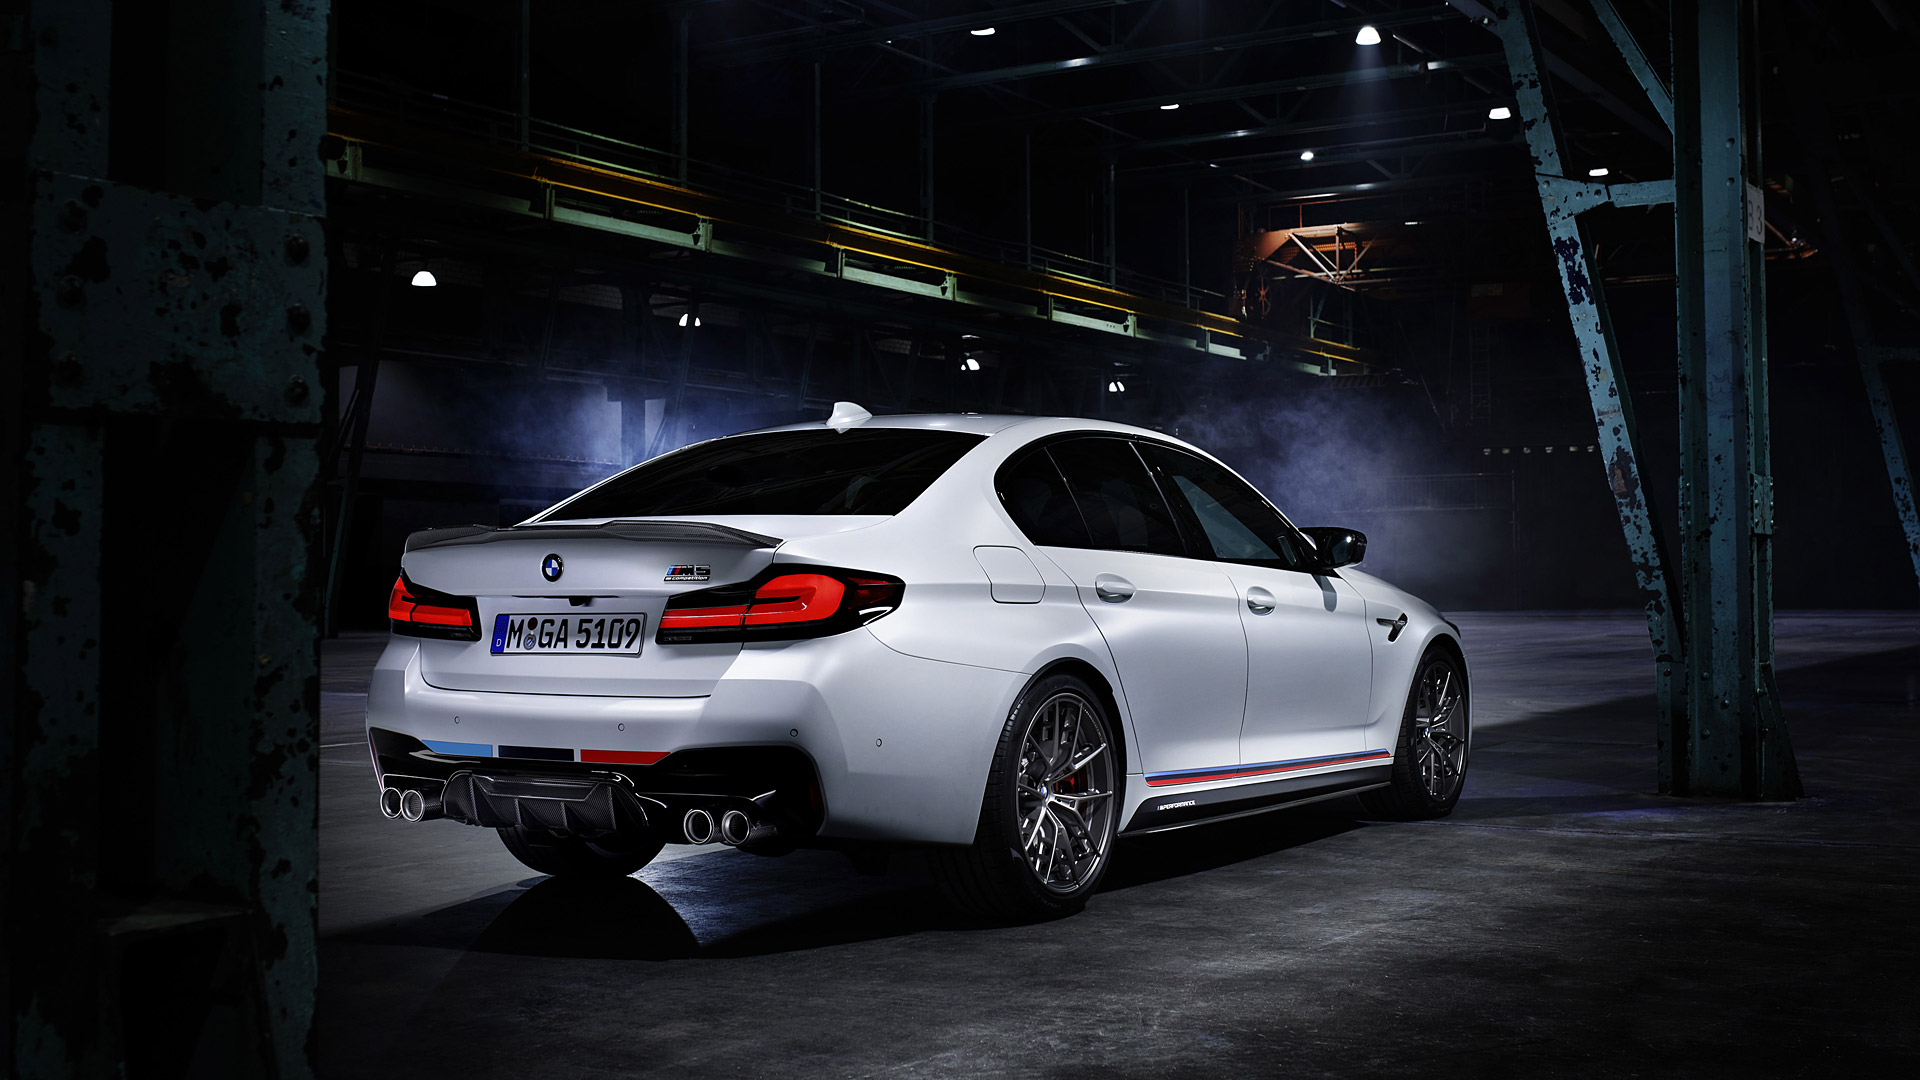  2021 BMW M5 Competition Wallpaper.